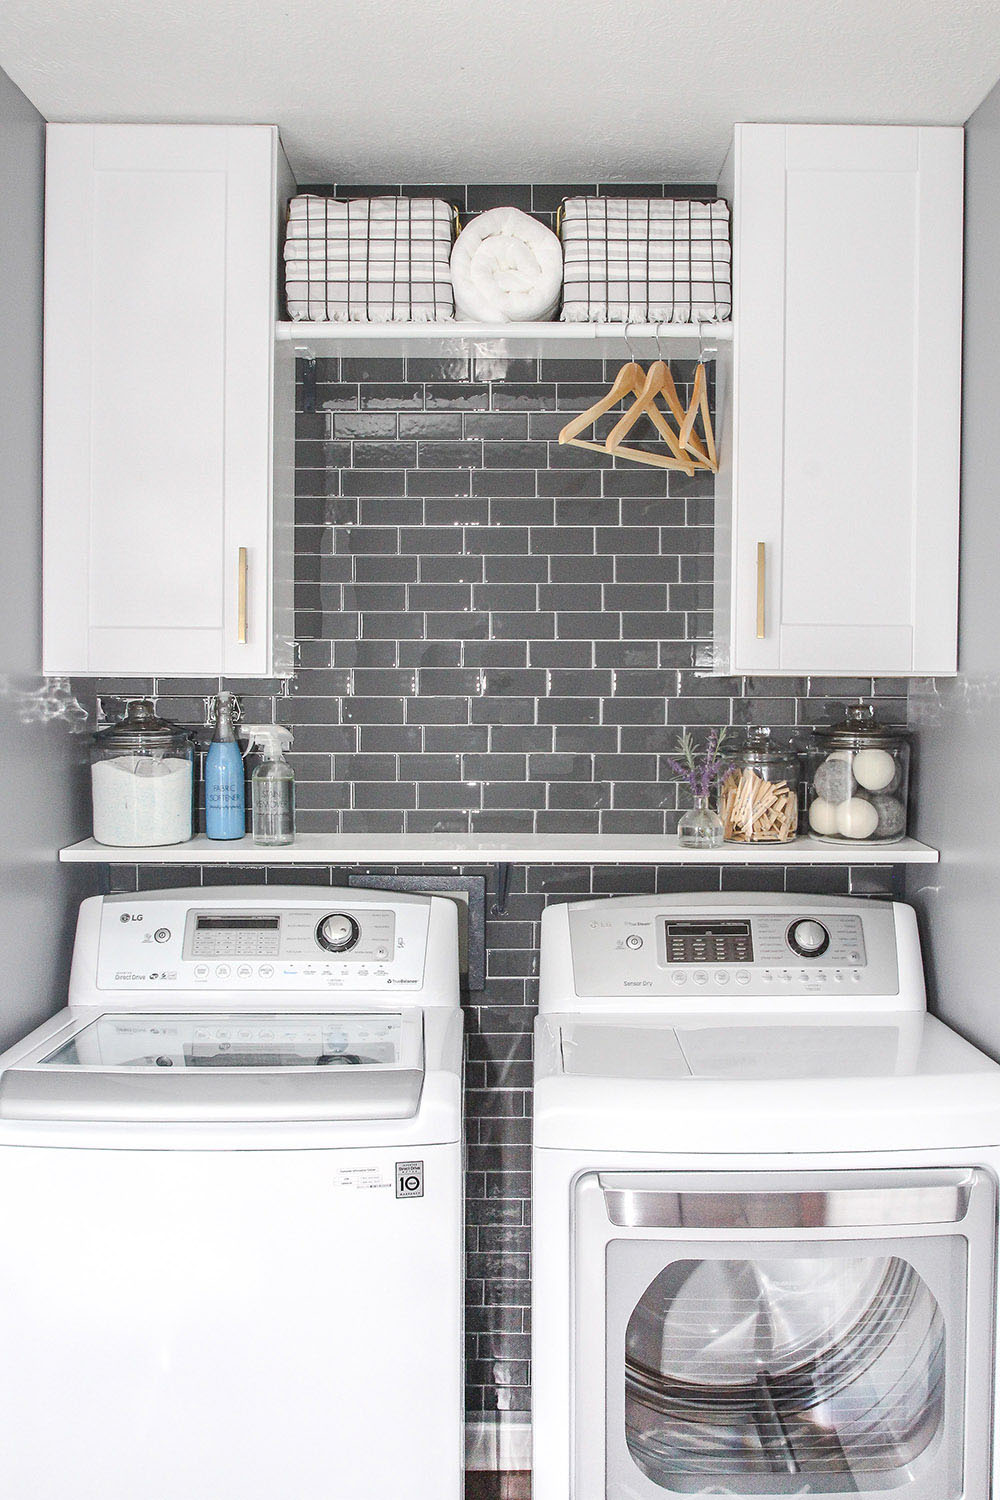 A laundry room decorated in gray and white with white laundry appliances.